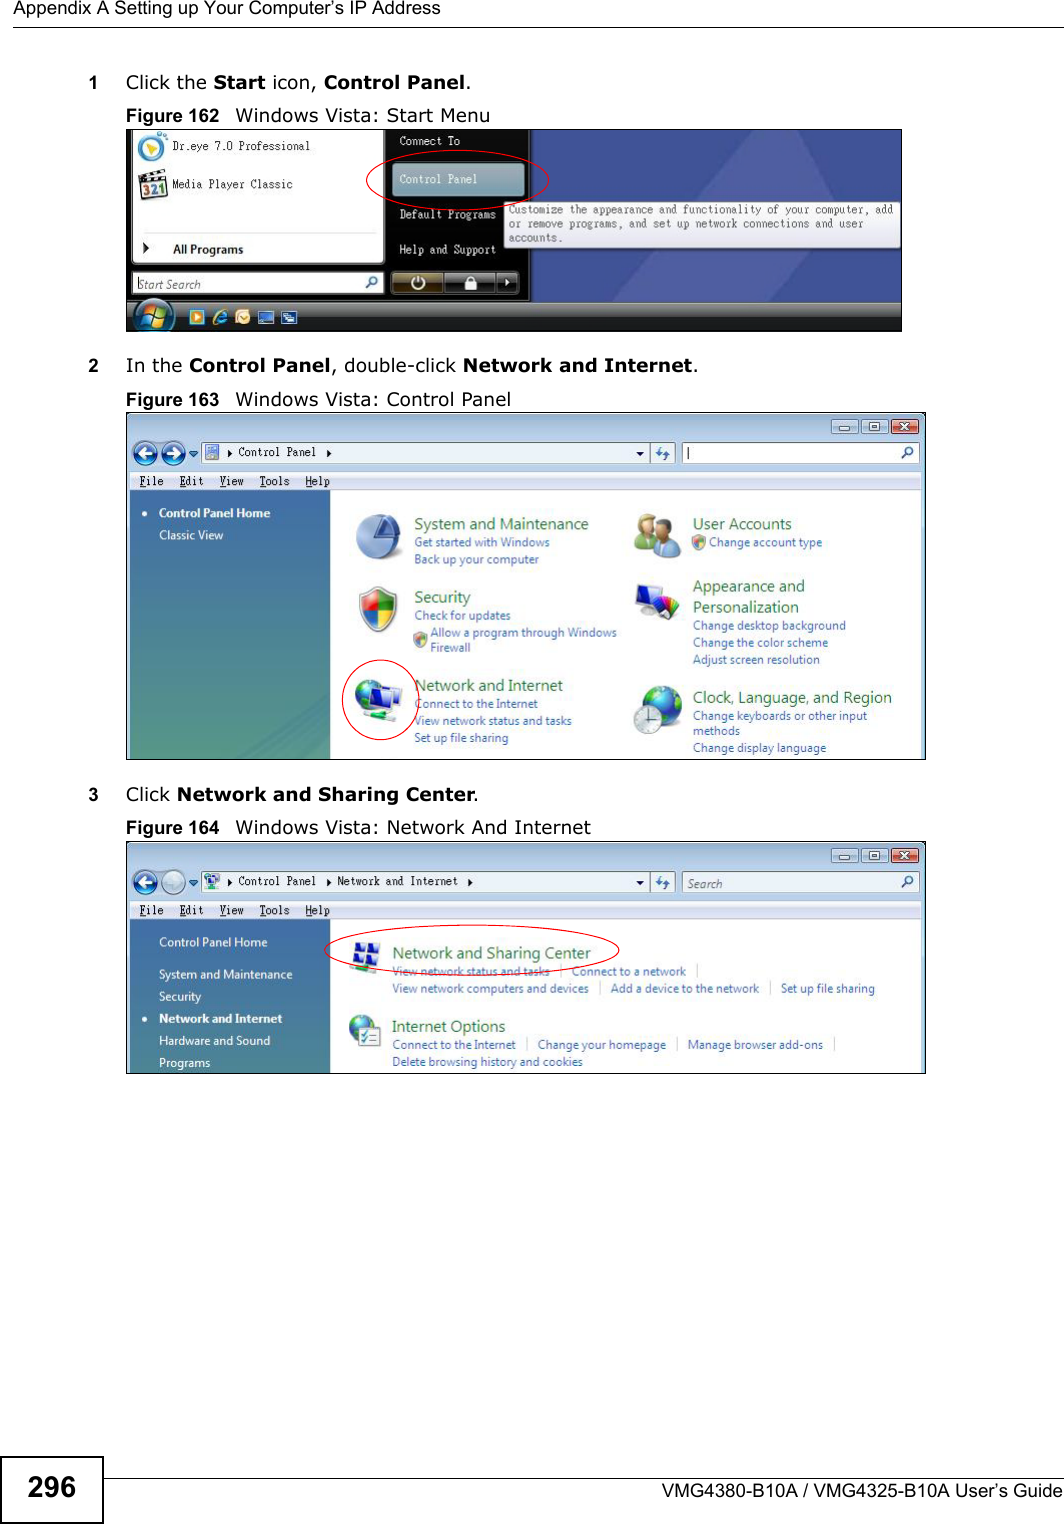 Appendix A Setting up Your Computer’s IP AddressVMG4380-B10A / VMG4325-B10A User’s Guide2961Click the Start icon, Control Panel.Figure 162   Windows Vista: Start Menu2In the Control Panel, double-click Network and Internet.Figure 163   Windows Vista: Control Panel3Click Network and Sharing Center.Figure 164   Windows Vista: Network And Internet